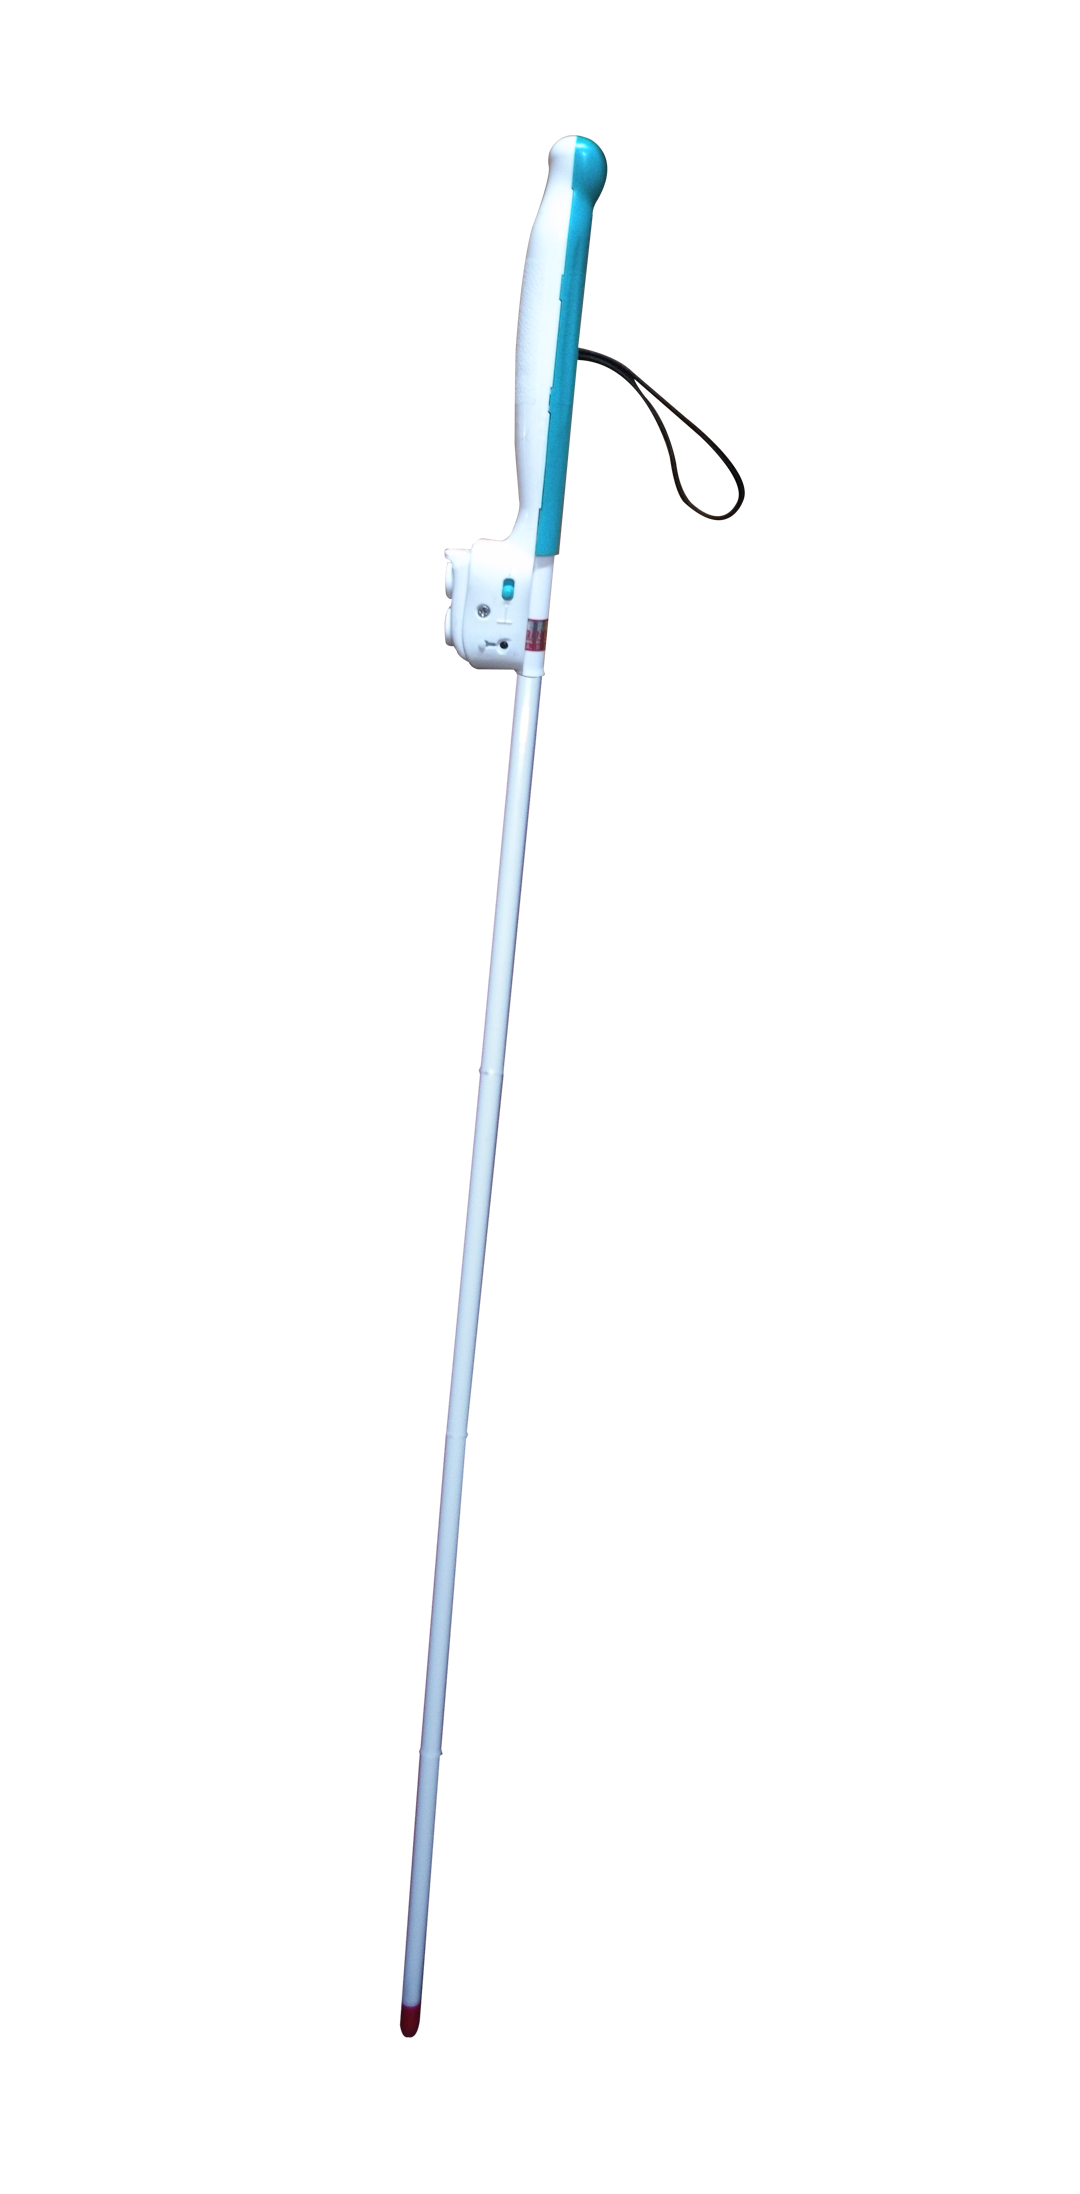 Visual example of the SmartCane product